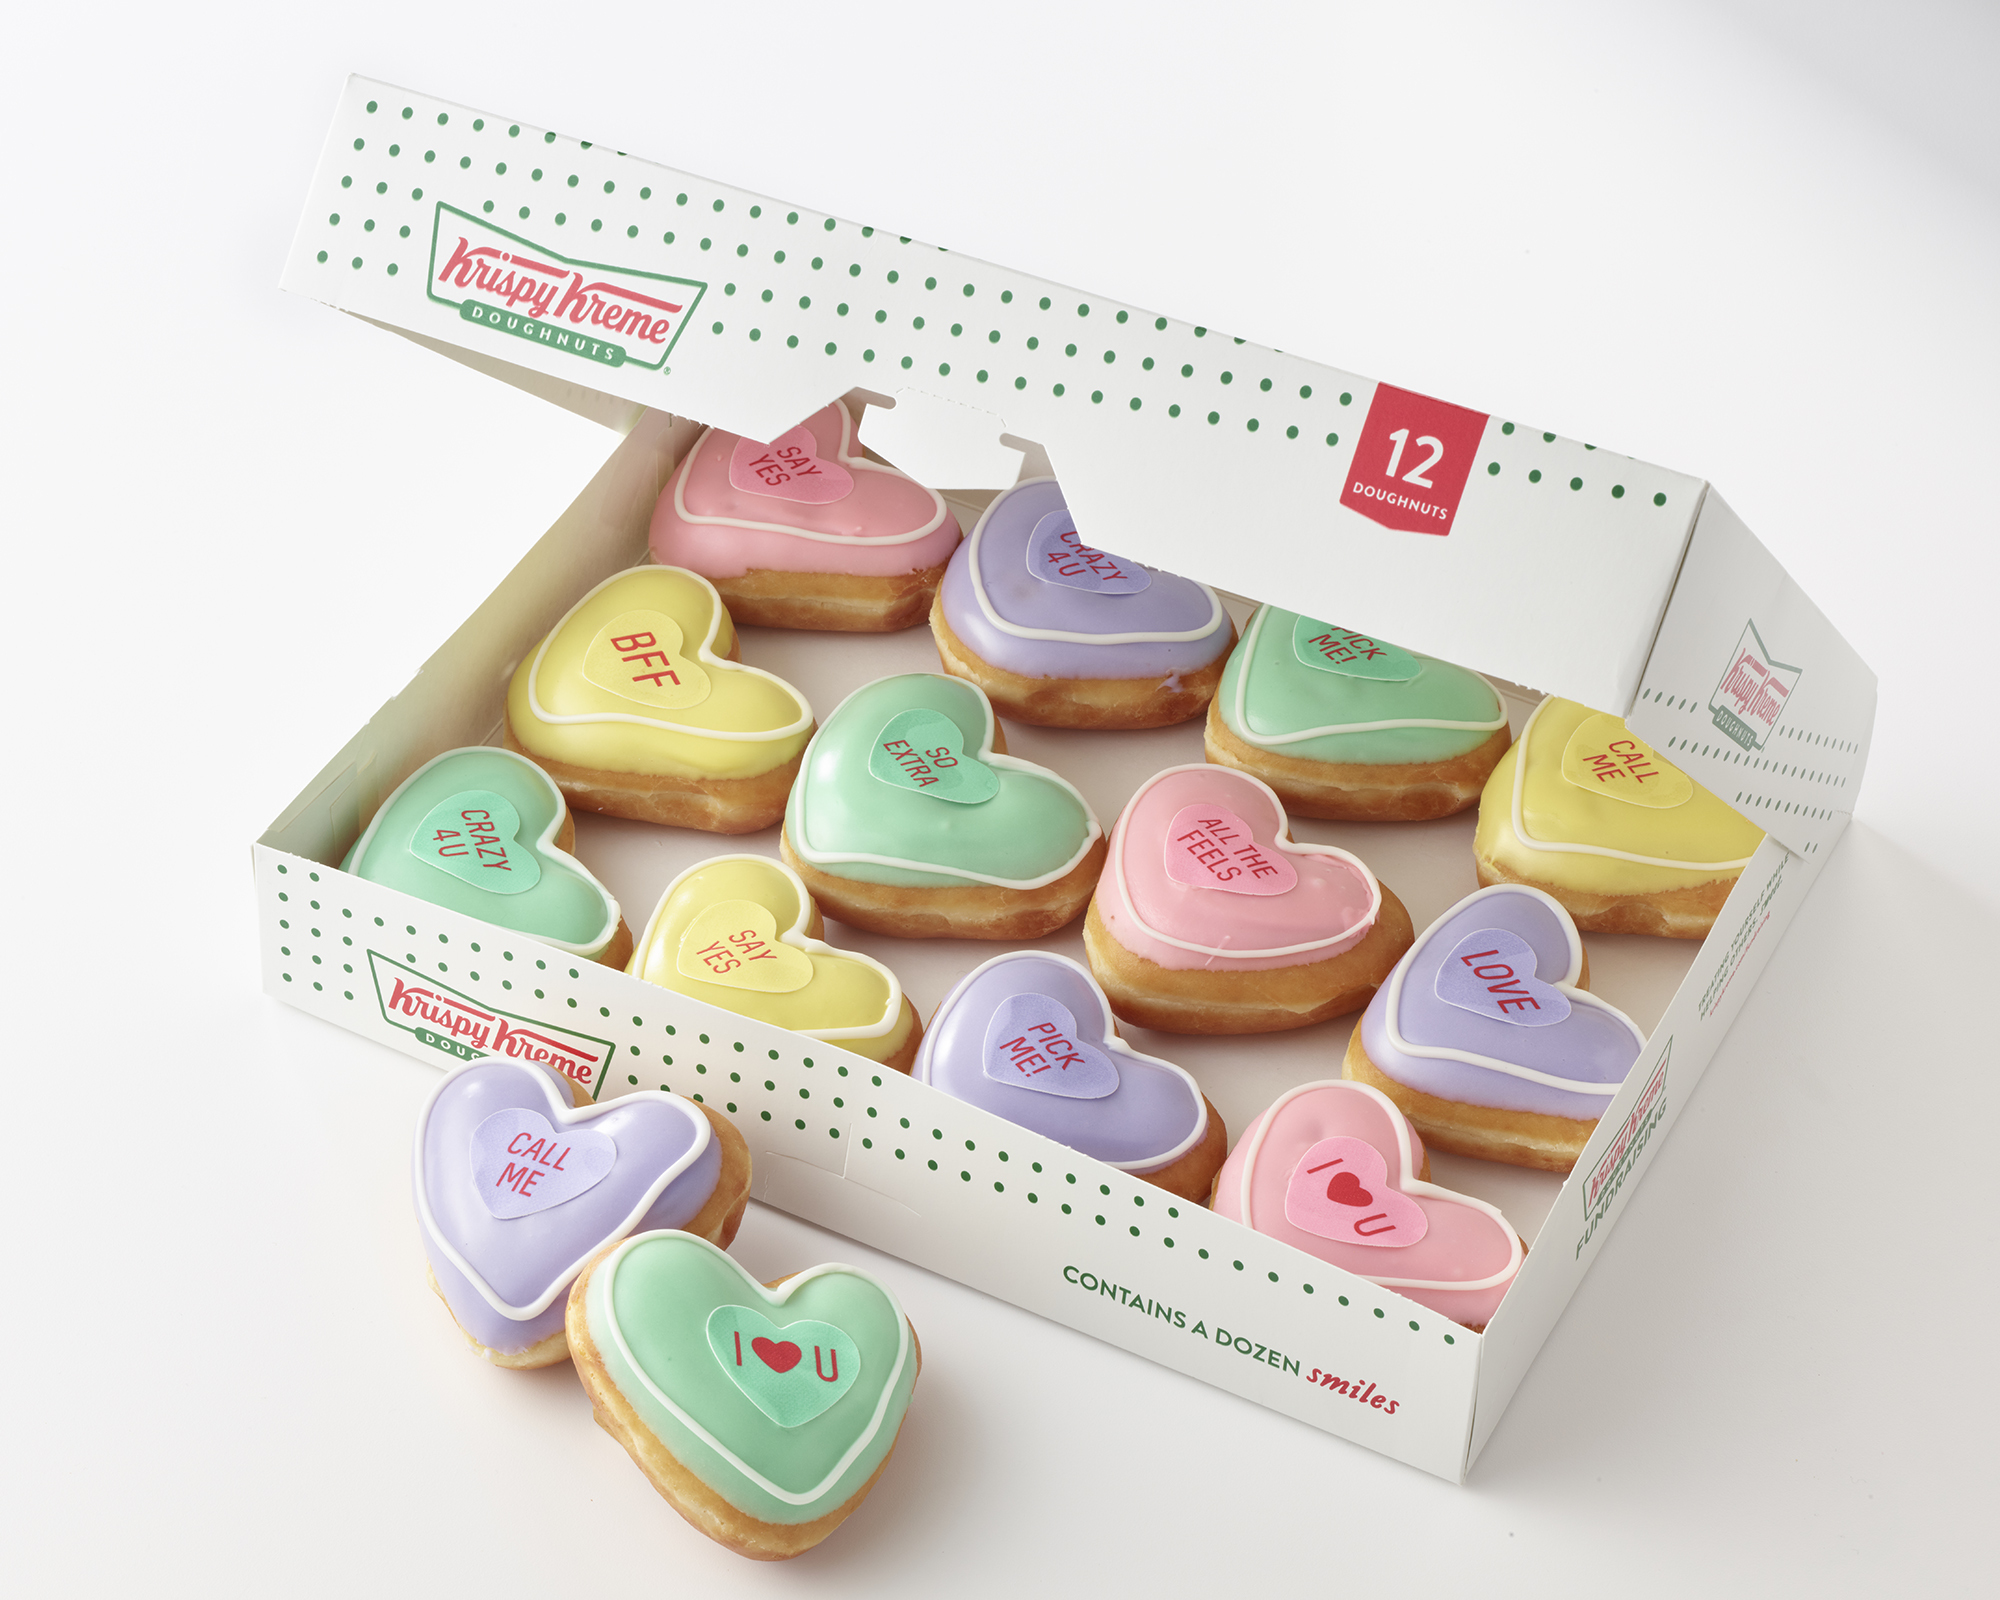 Say It With Valentine Doughnuts Krispy Kreme Doughnuts Introduces Valentine Conversation Doughnuts Filling A Need And Enabling Fans To Express All The Feels Business Wire